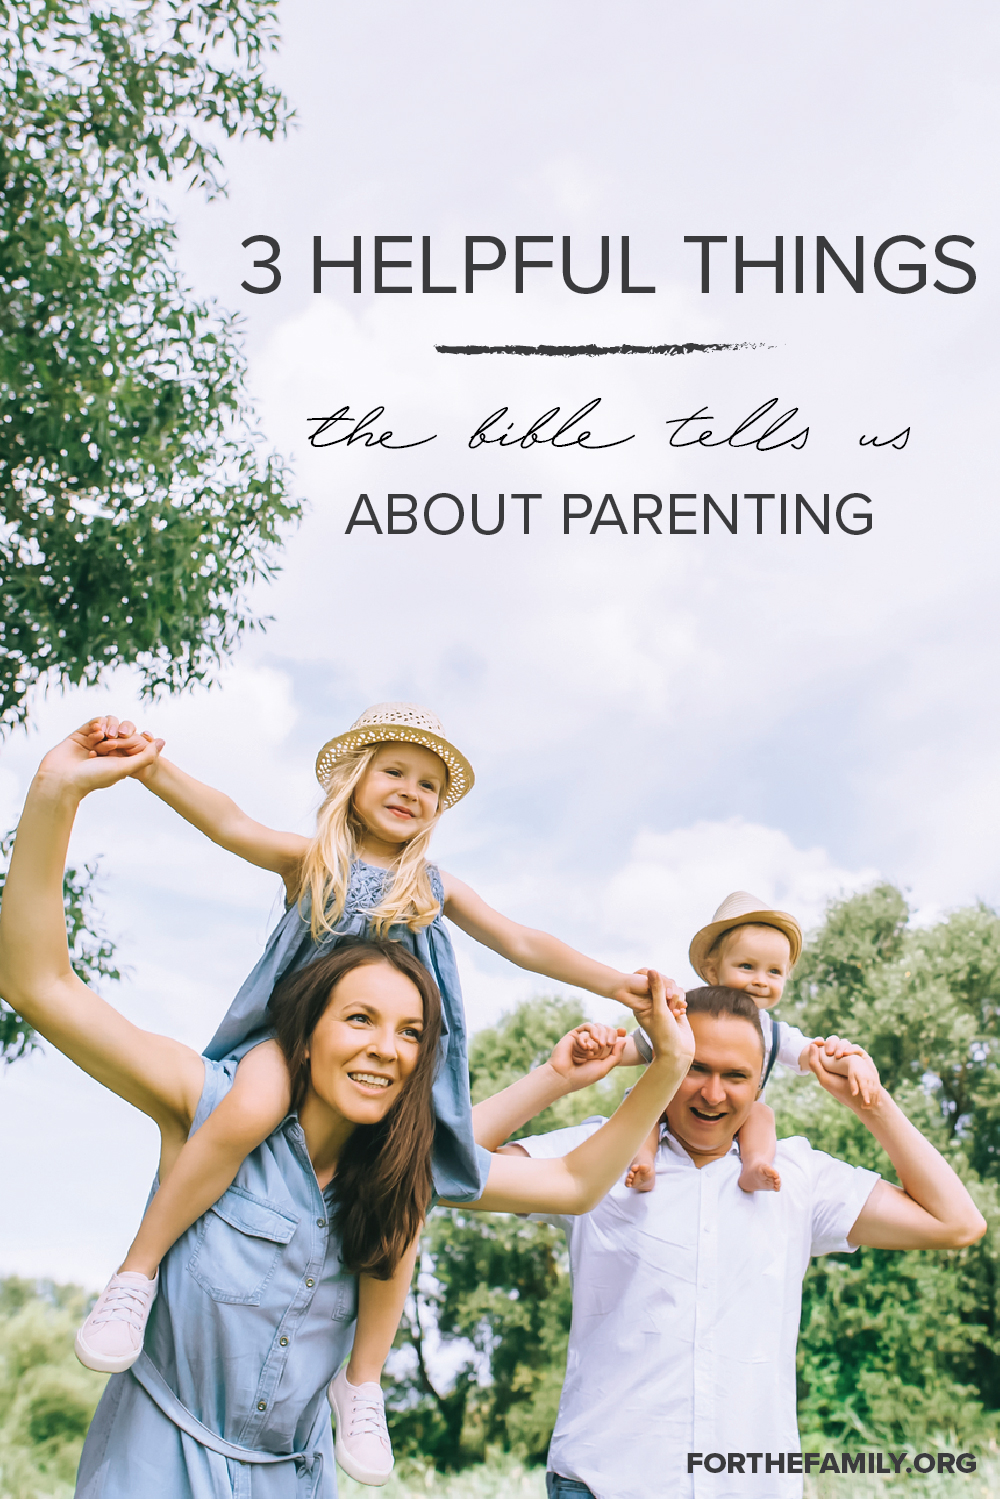 3 Helpful Things the Bible Tells Us About Parenting